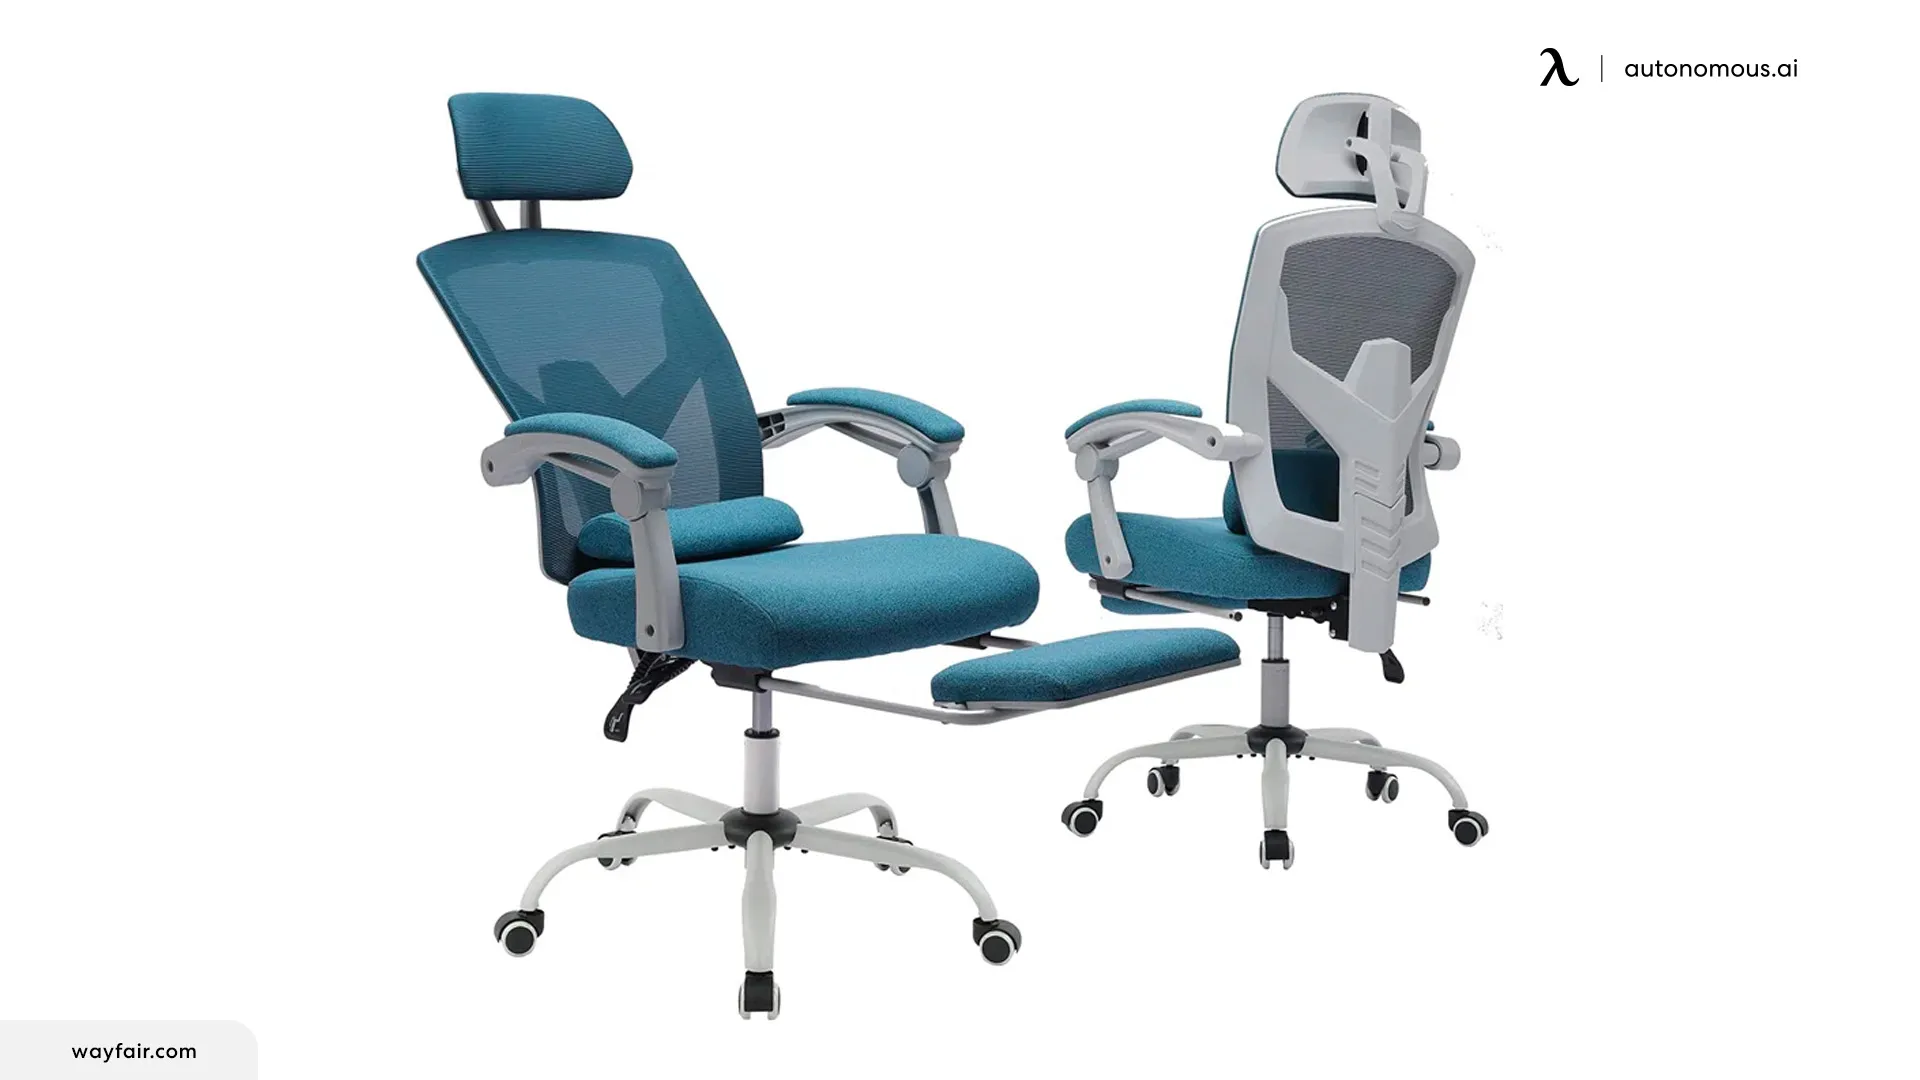 Choosing the Right Type of Chair